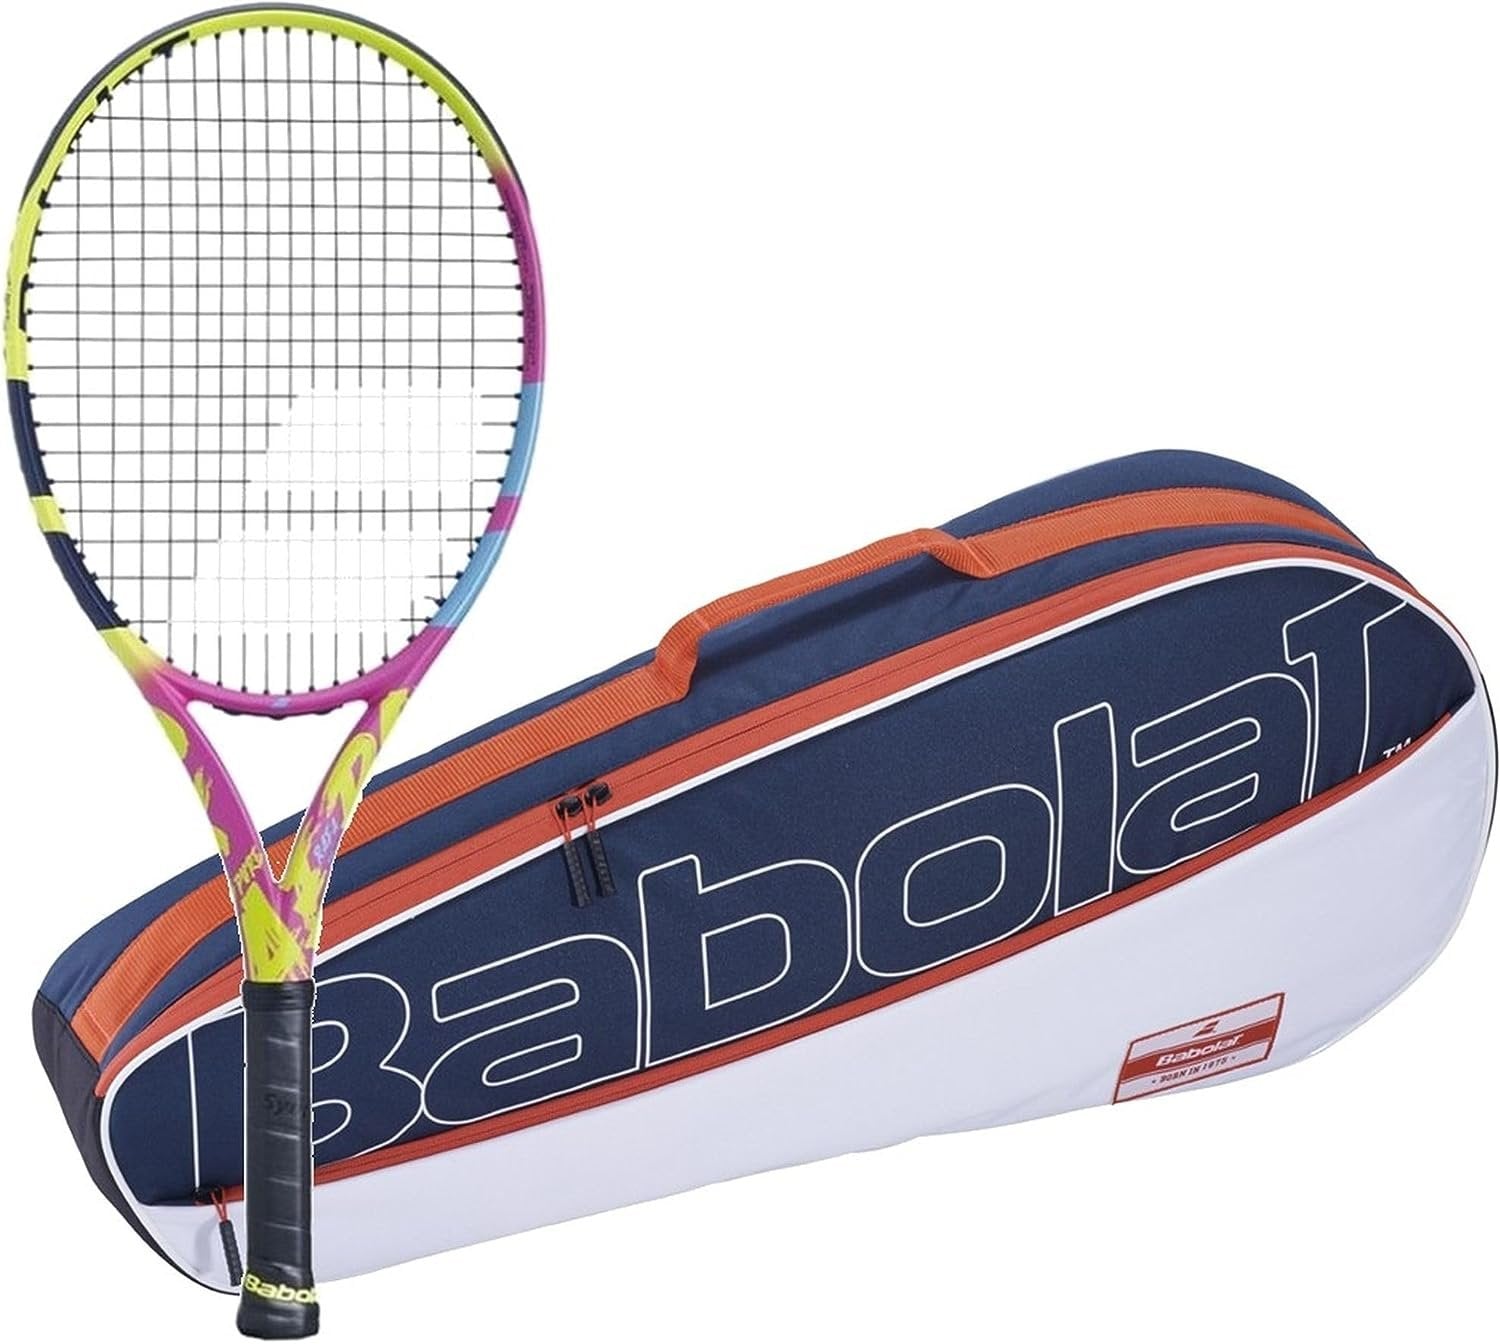 Babolat Pure Aero Rafa 26 Inch Junior Tennis Racquet Bundled with a Club Bag or Backpack - The only Racquet Designed to Help Young Players emulate Their Idol, Rafa Nadal